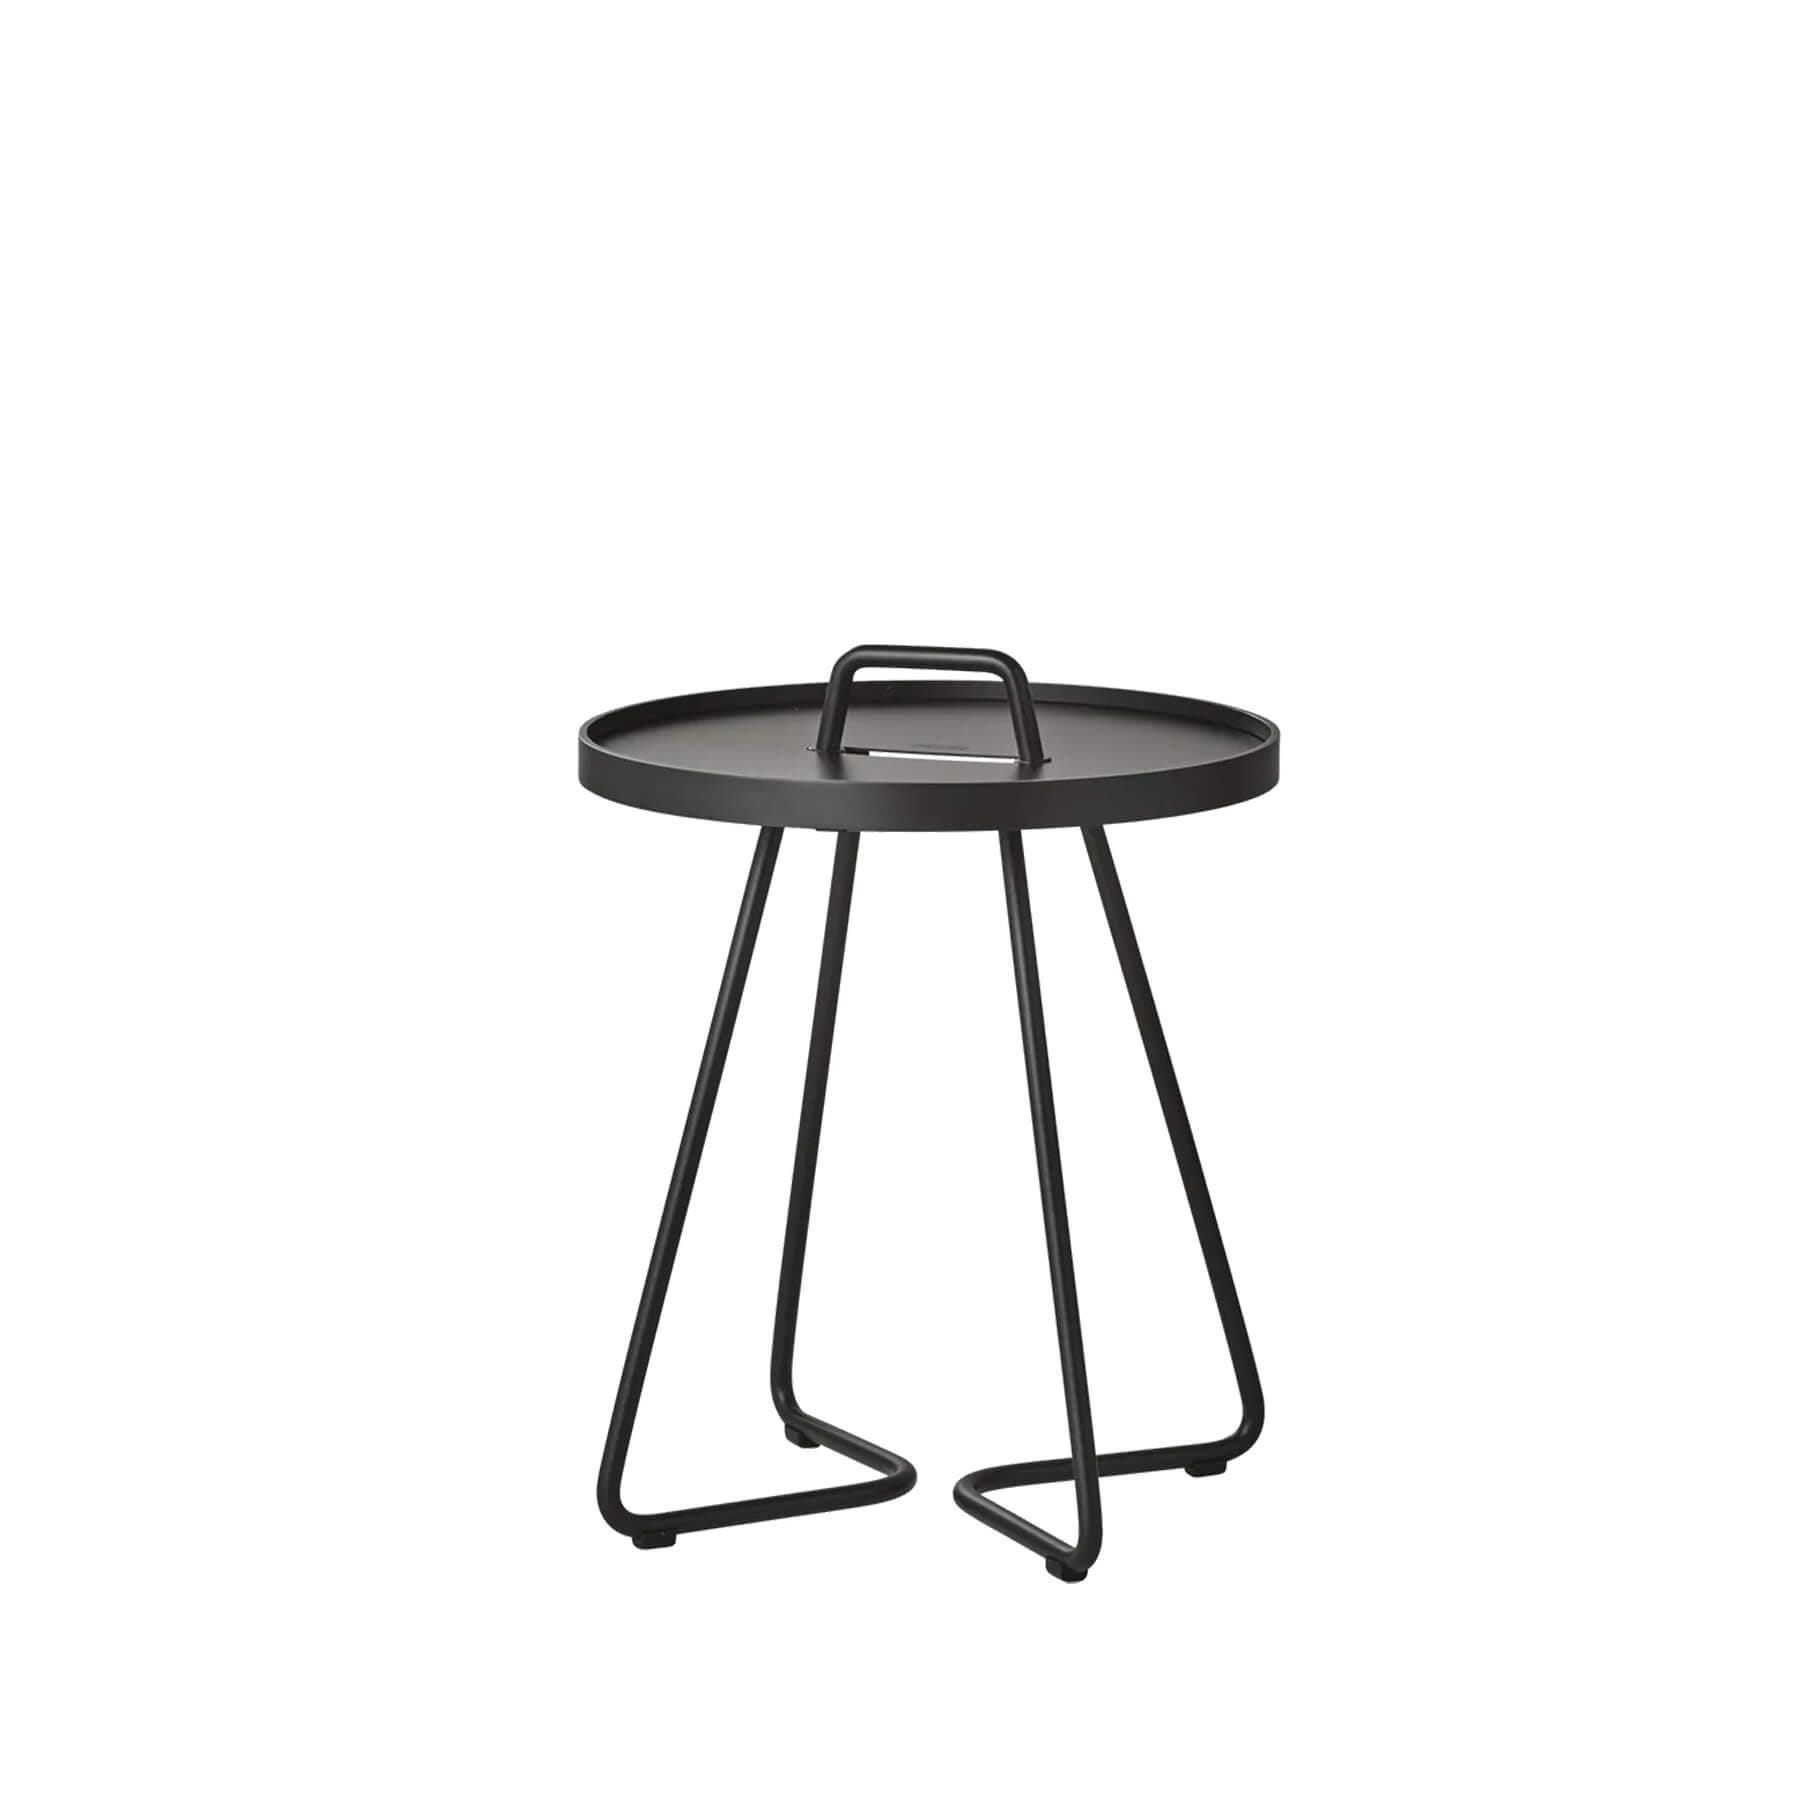 Caneline On The Move Side Table Mini Black Designer Furniture From Holloways Of Ludlow